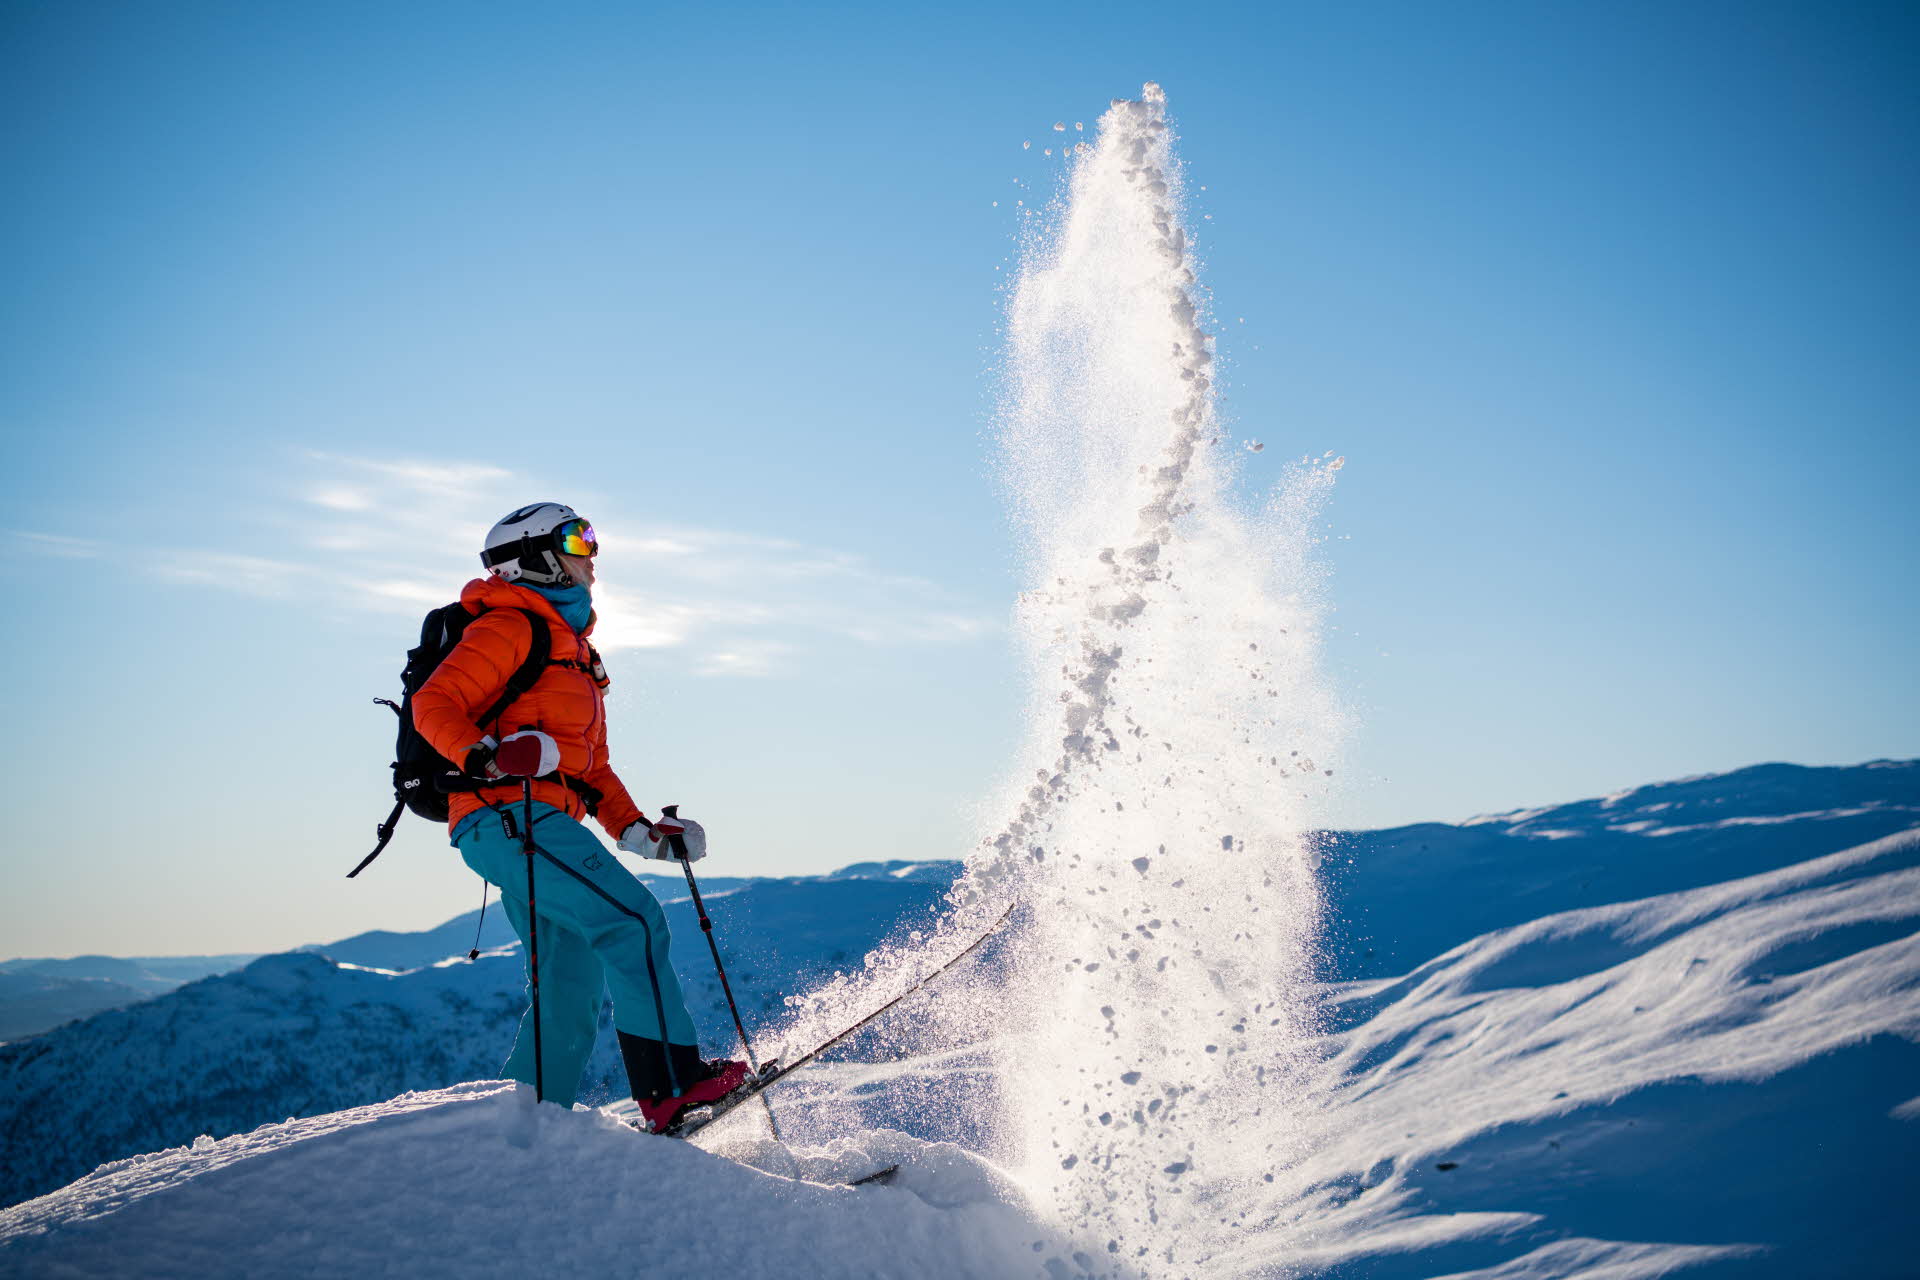 A person in helmet, red jacket, and blue pants throwing snow up with a ski surrounded by snow mountains. 